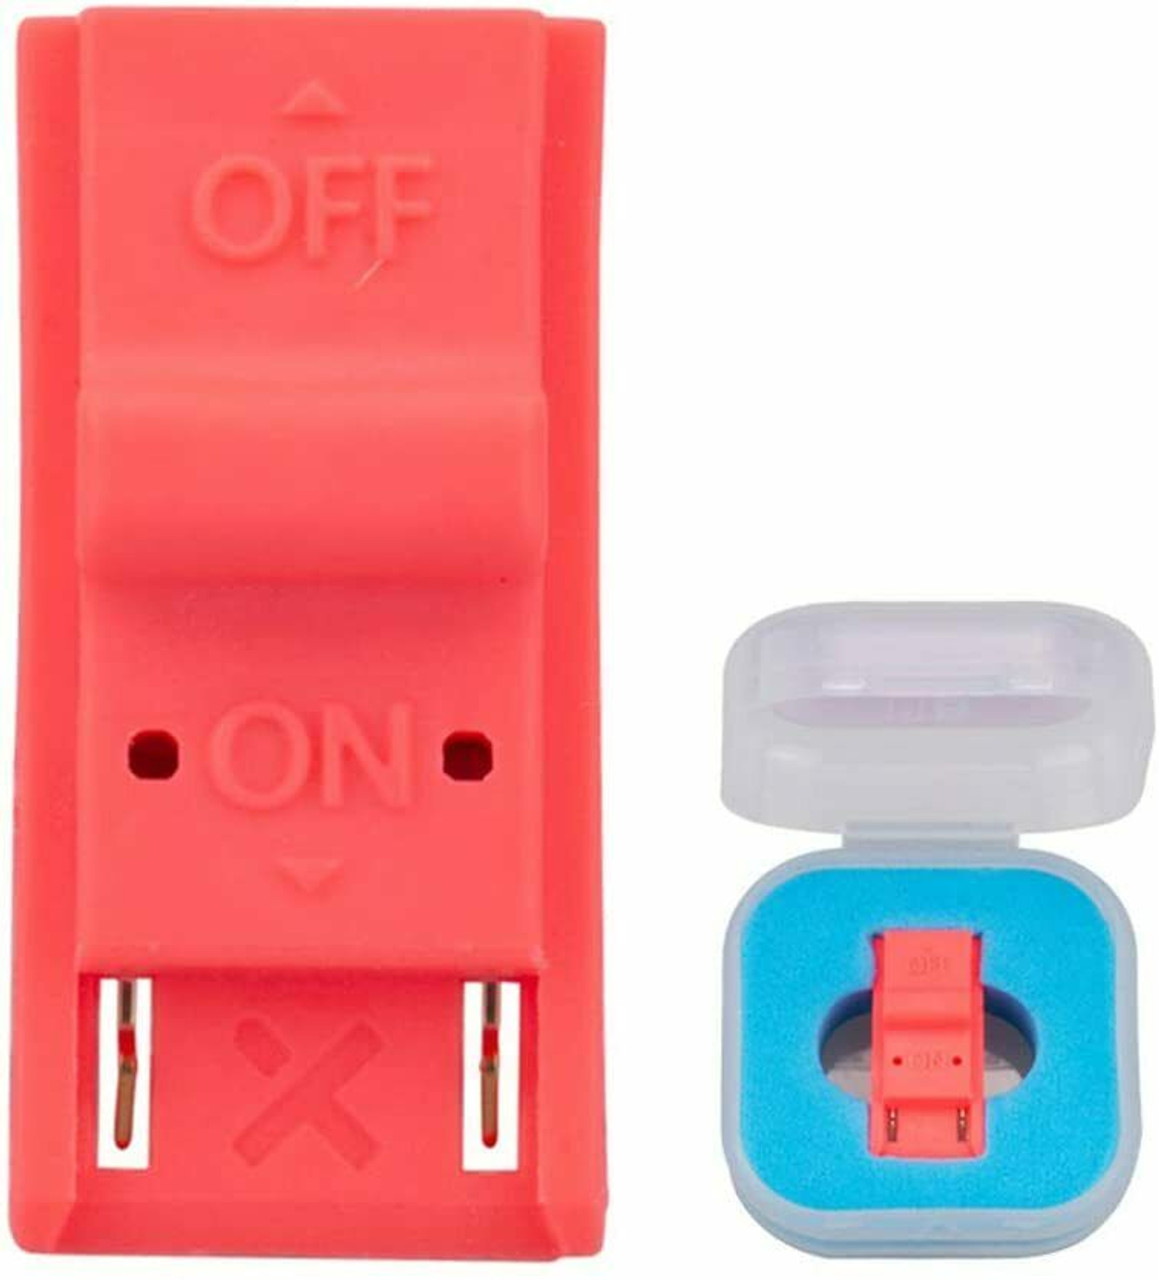 RED RCM Tool Clip Short Circuit Jig For Nintendo Switch Loader Recovery Mode NEW